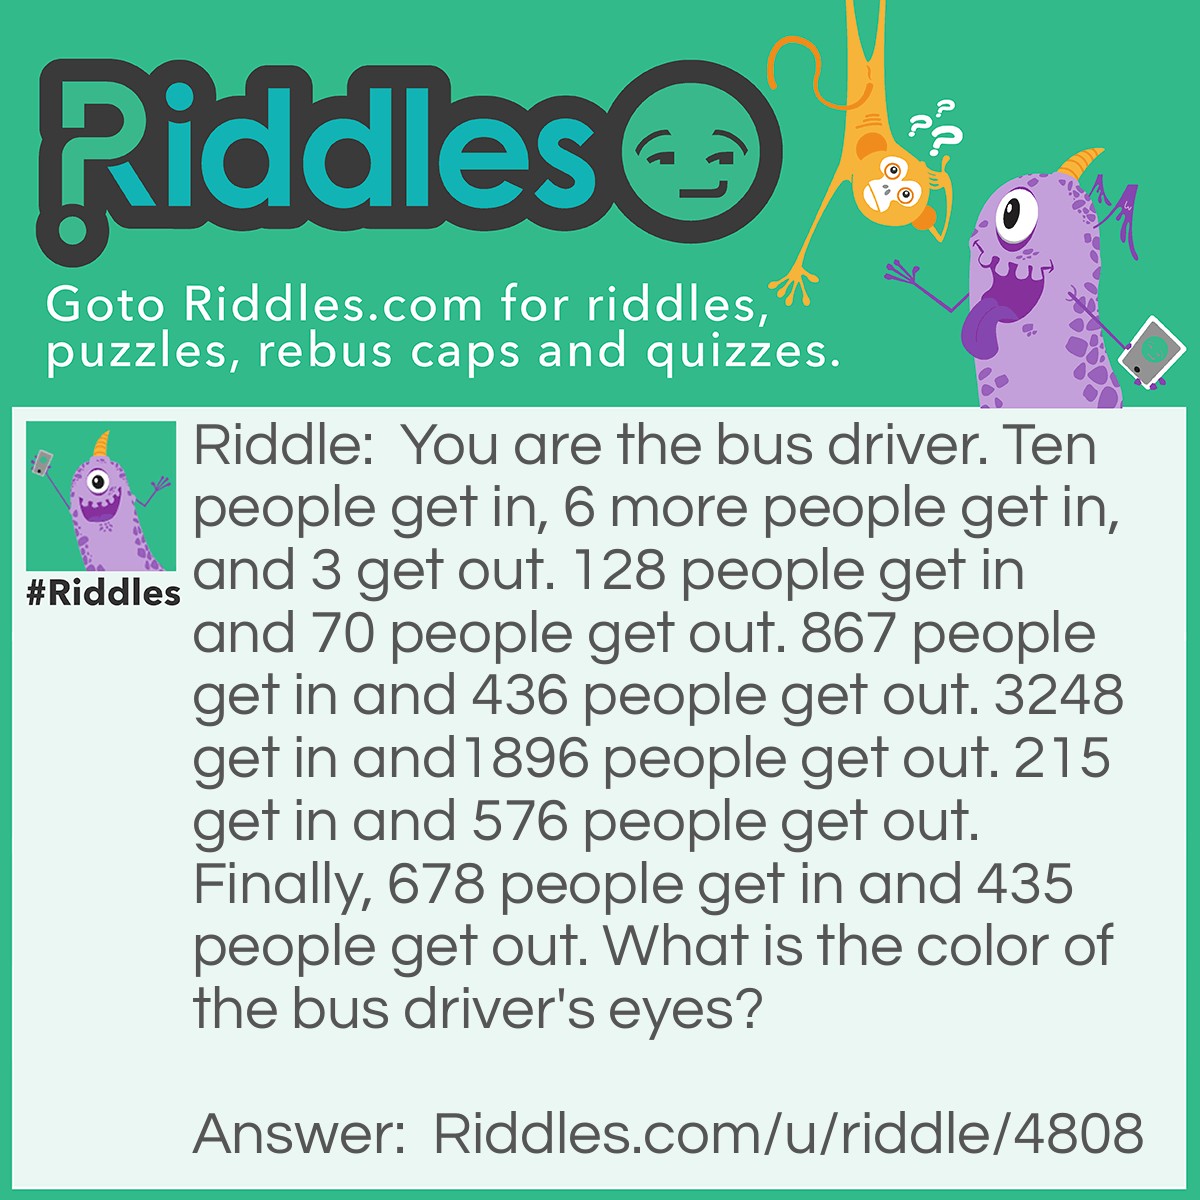 Riddle: You are the bus driver. Ten people get in, 6 more people get in, and 3 get out. 128 people get in and 70 people get out. 867 people get in and 436 people get out. 3248 get in and1896 people get out. 215 get in and 576 people get out. Finally, 678 people get in and 435 people get out. What is the color of the bus driver's eyes? Answer: What ever your eye color is!